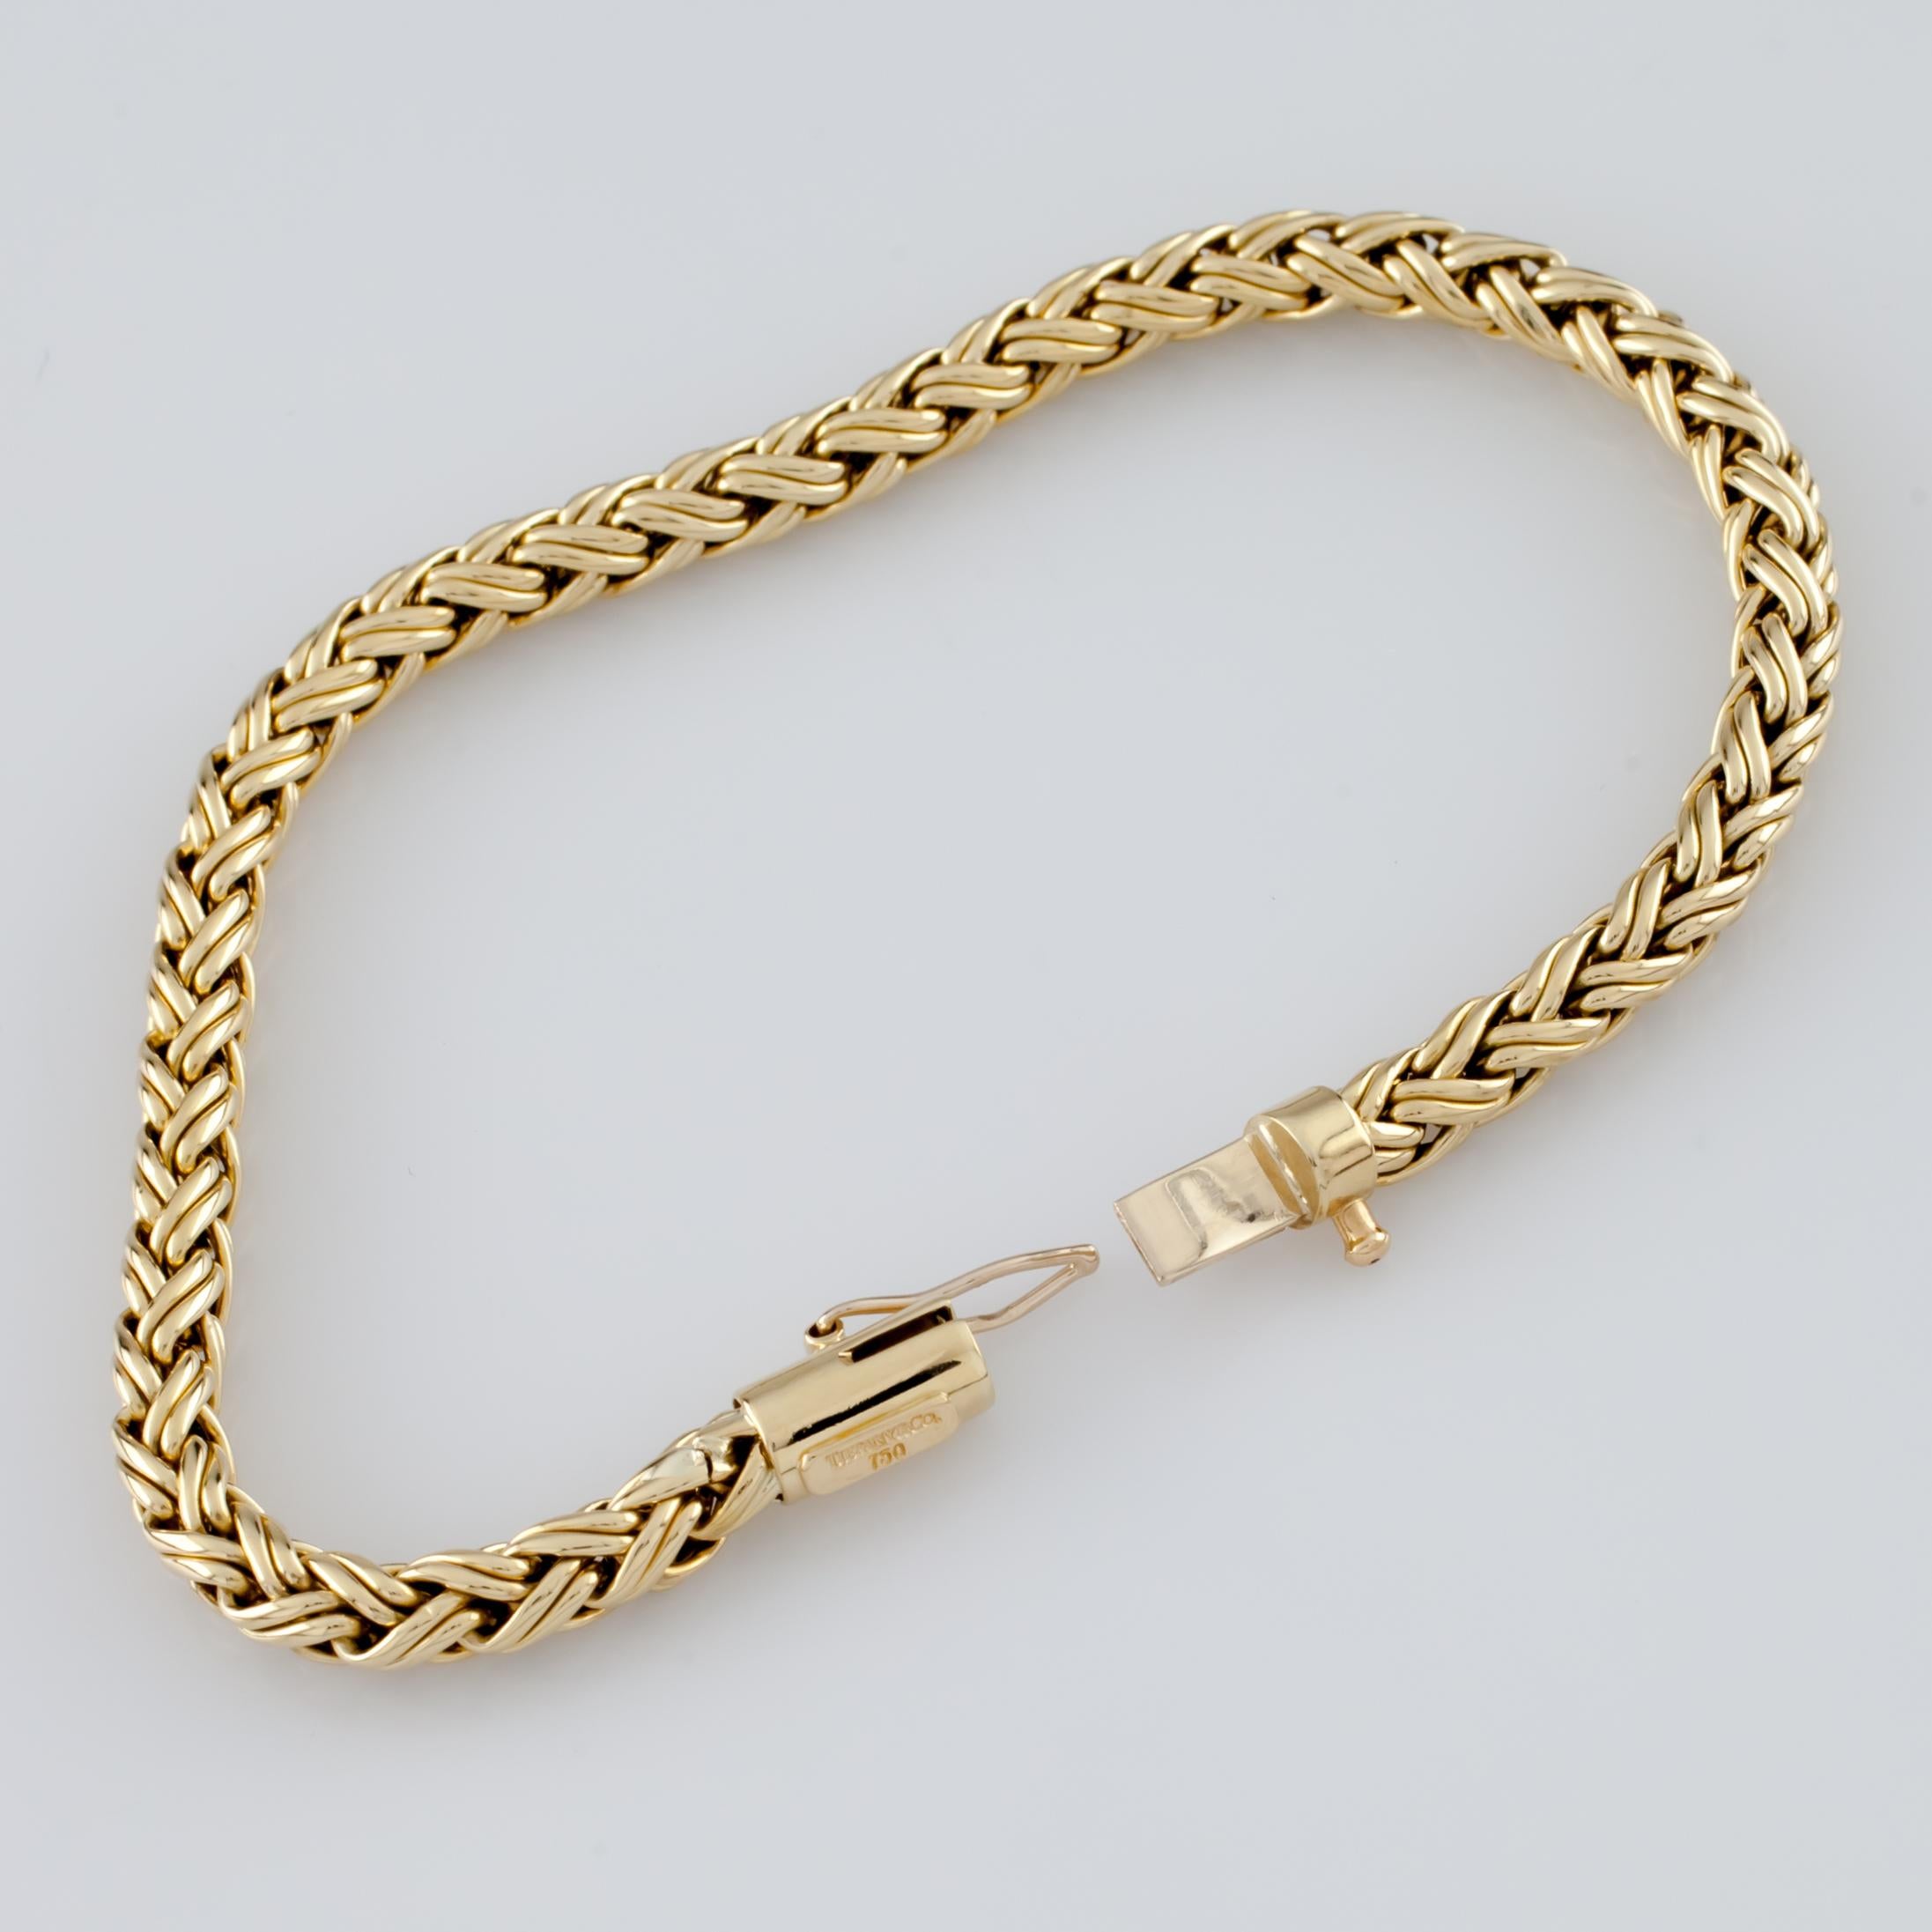 Gorgeous Tiffany & Co Bracelet
Russian Wheat Weave Chain
18k Yellow Gold
Total Mass = 12.3 grams
4 mm Wide
Total Length = 7.25